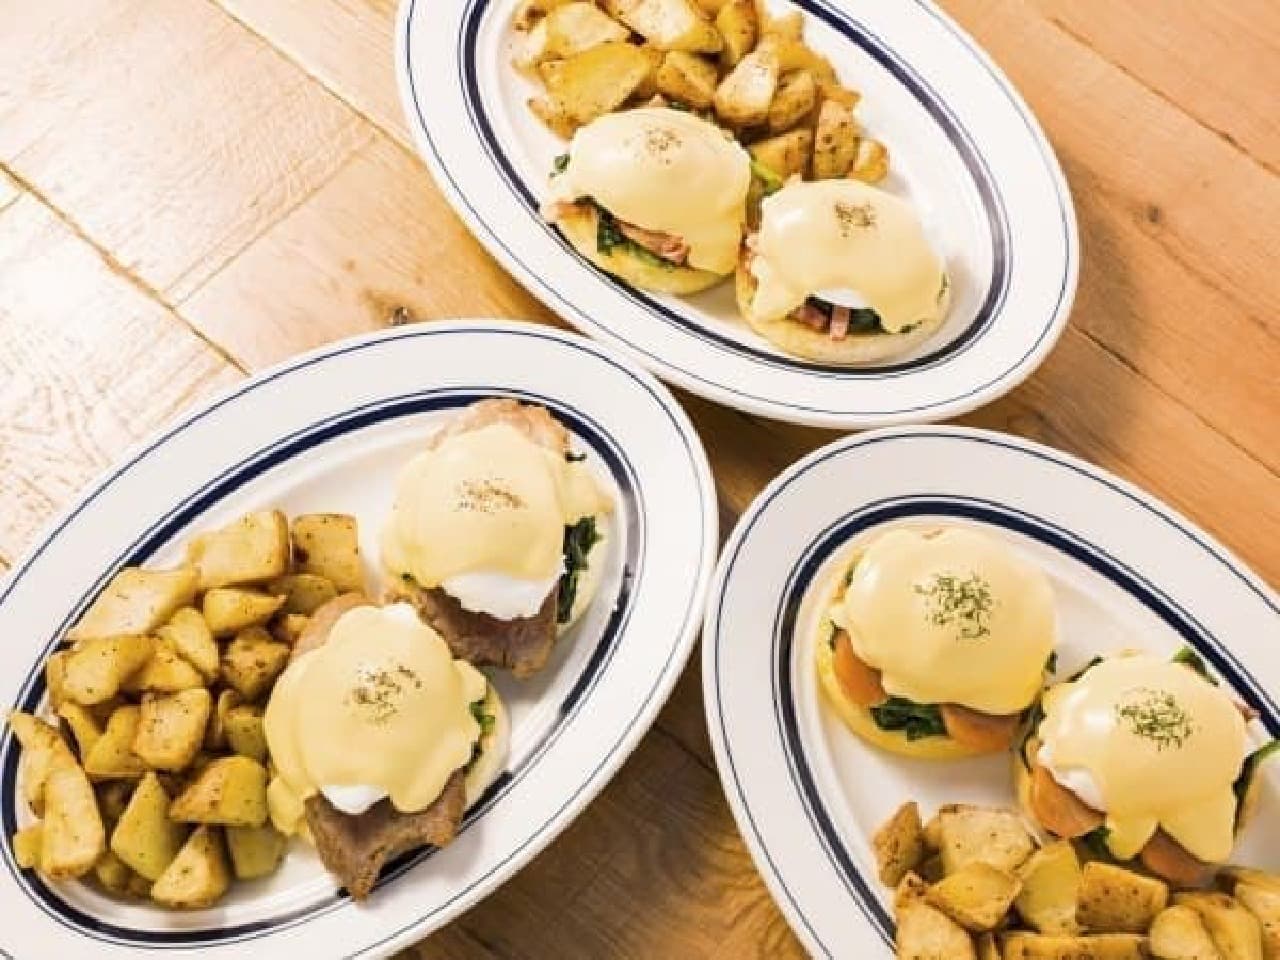 Clockwise from the upper right, "Eggs Benedict Standard", "Smoked salmon", "Canadian bacon"